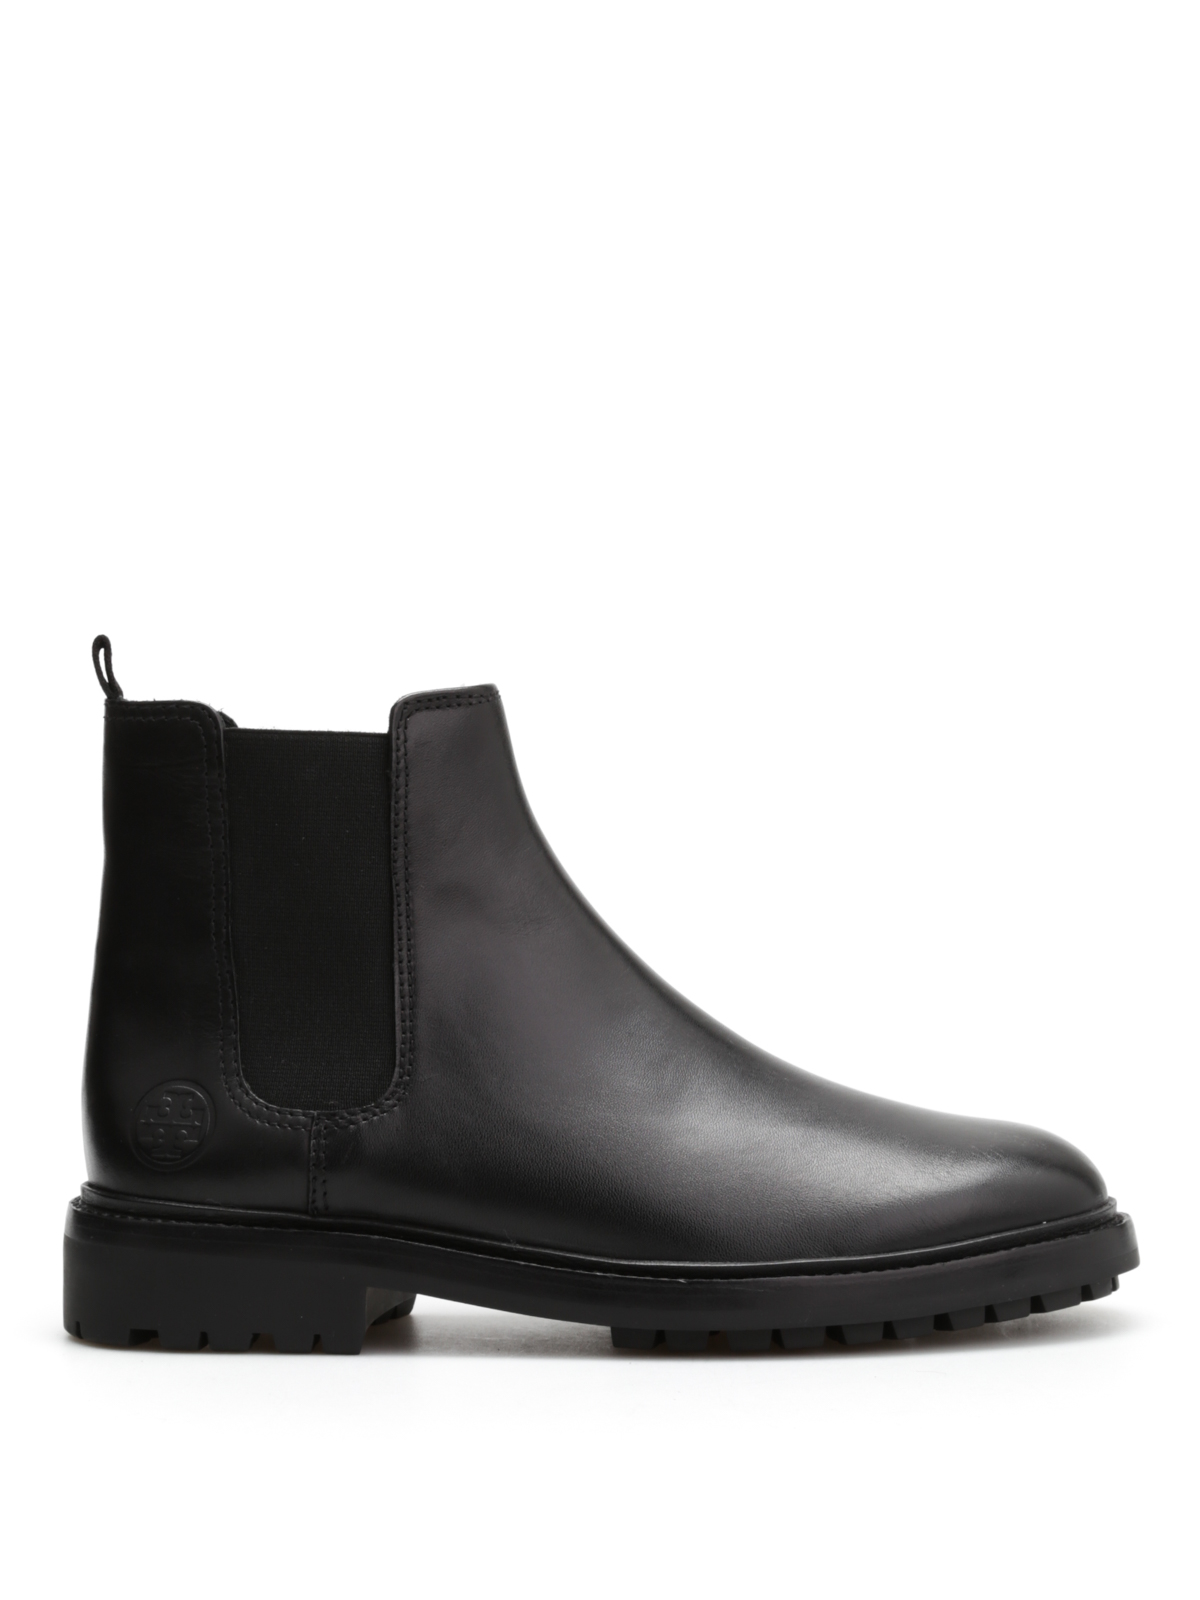 Tory Burch Chelsea Boots on Sale, SAVE 51% 